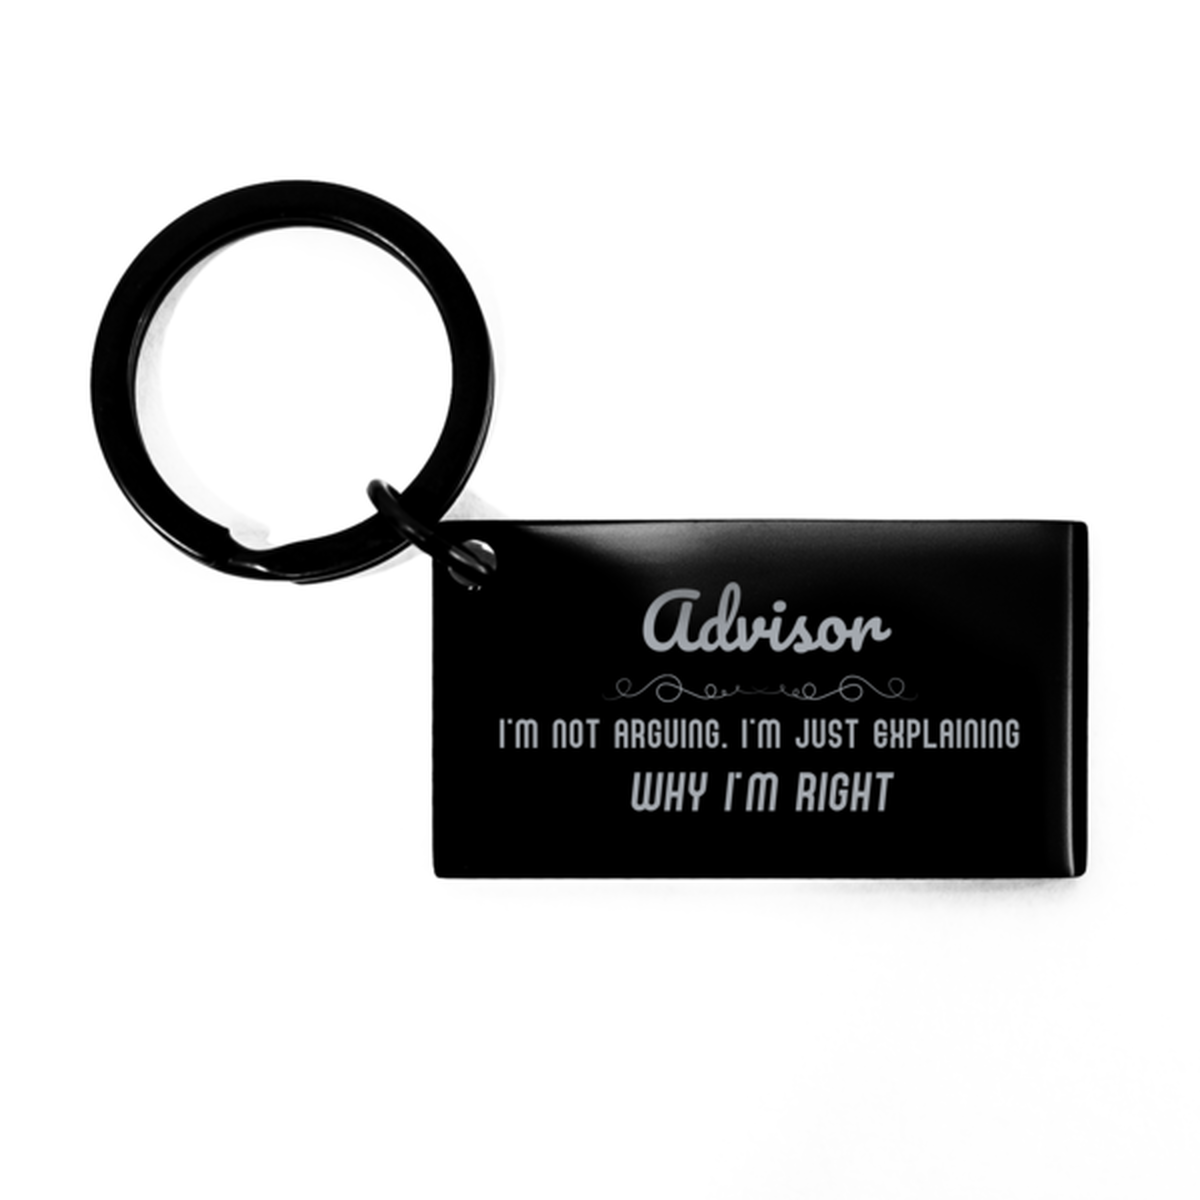 Advisor I'm not Arguing. I'm Just Explaining Why I'm RIGHT Keychain, Funny Saying Quote Advisor Gifts For Advisor Graduation Birthday Christmas Gifts for Men Women Coworker